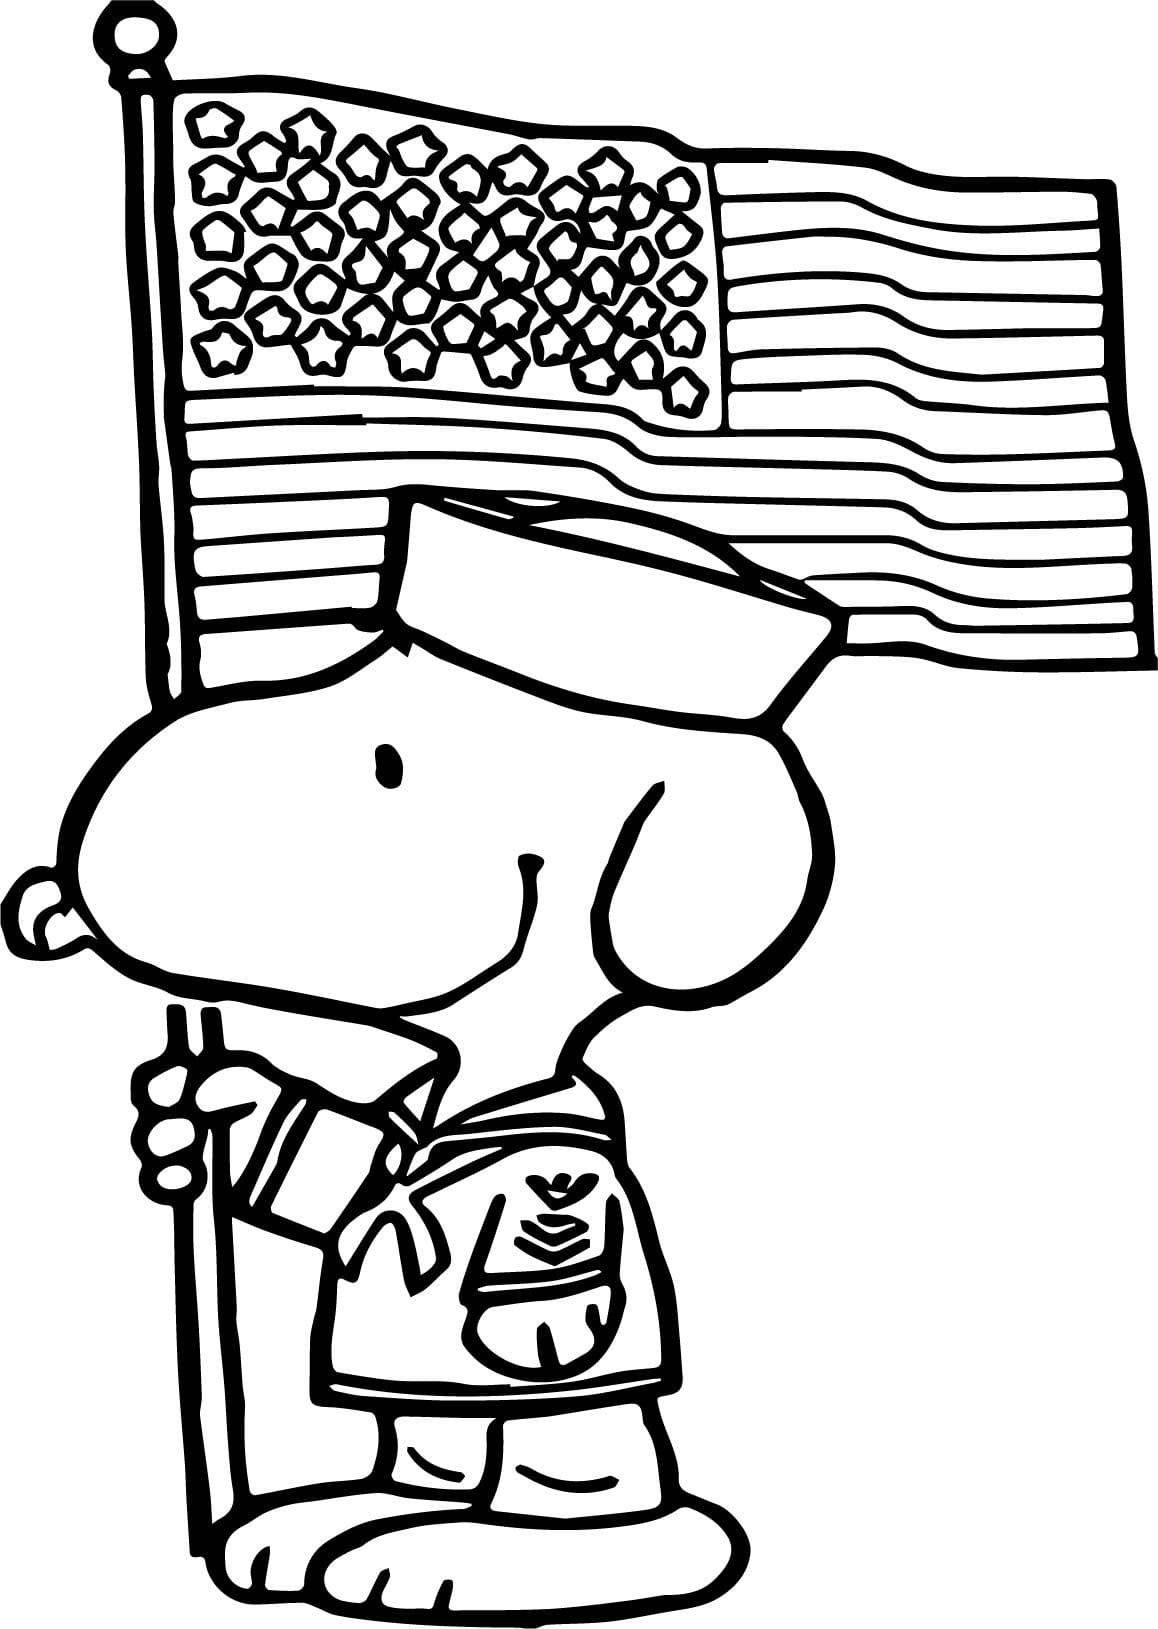 4Th Of July Coloring Pages. Independence Day Free Printable